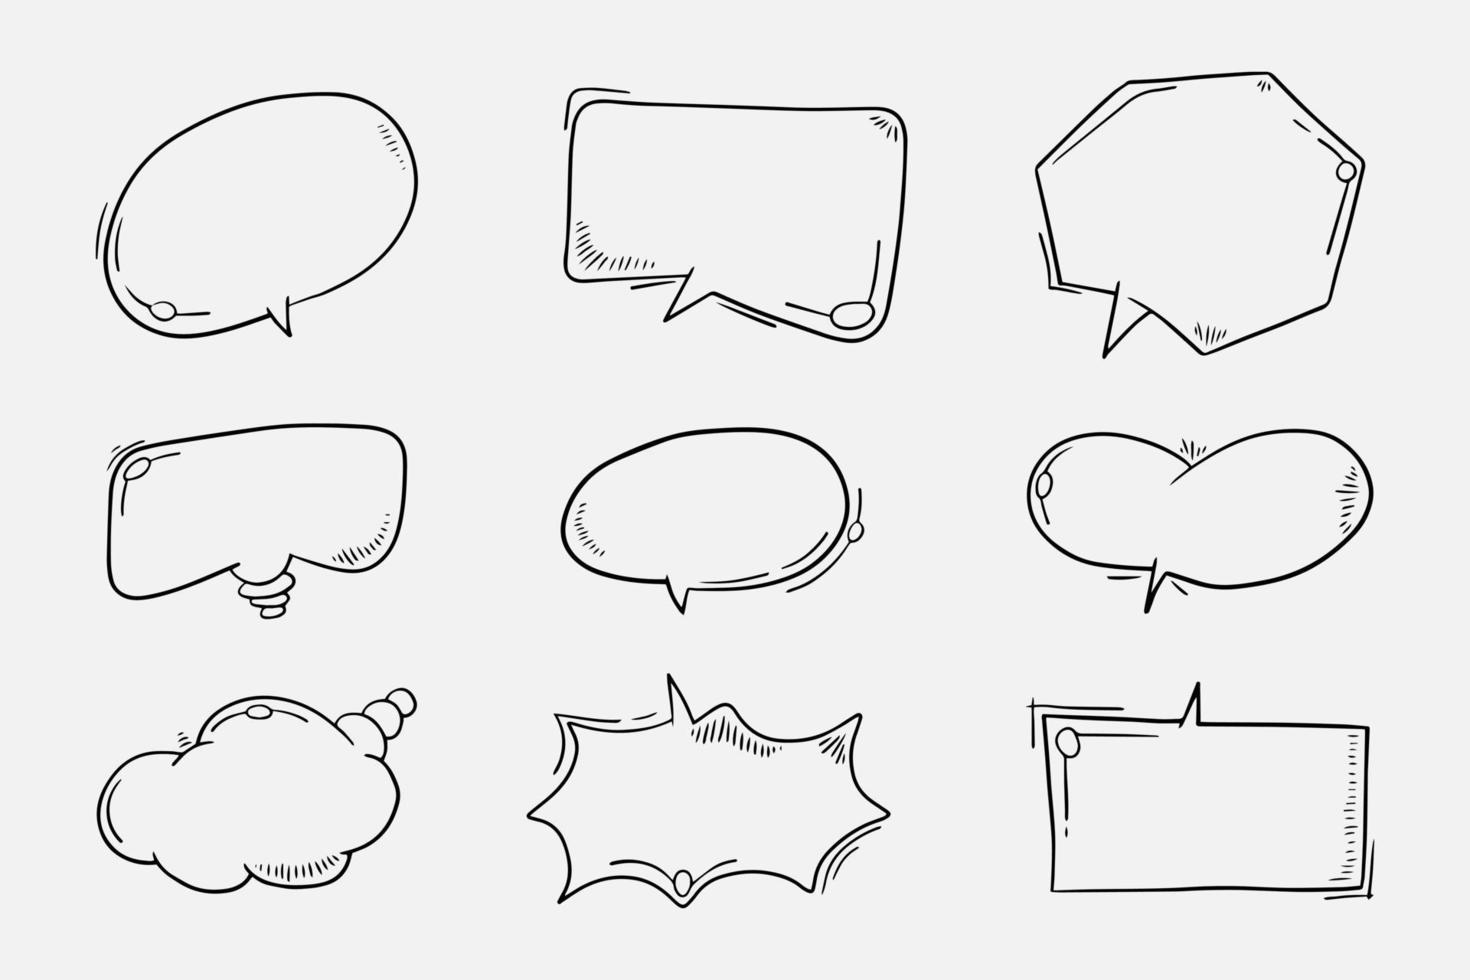 blank text bubbles for comics, banners and more. vector